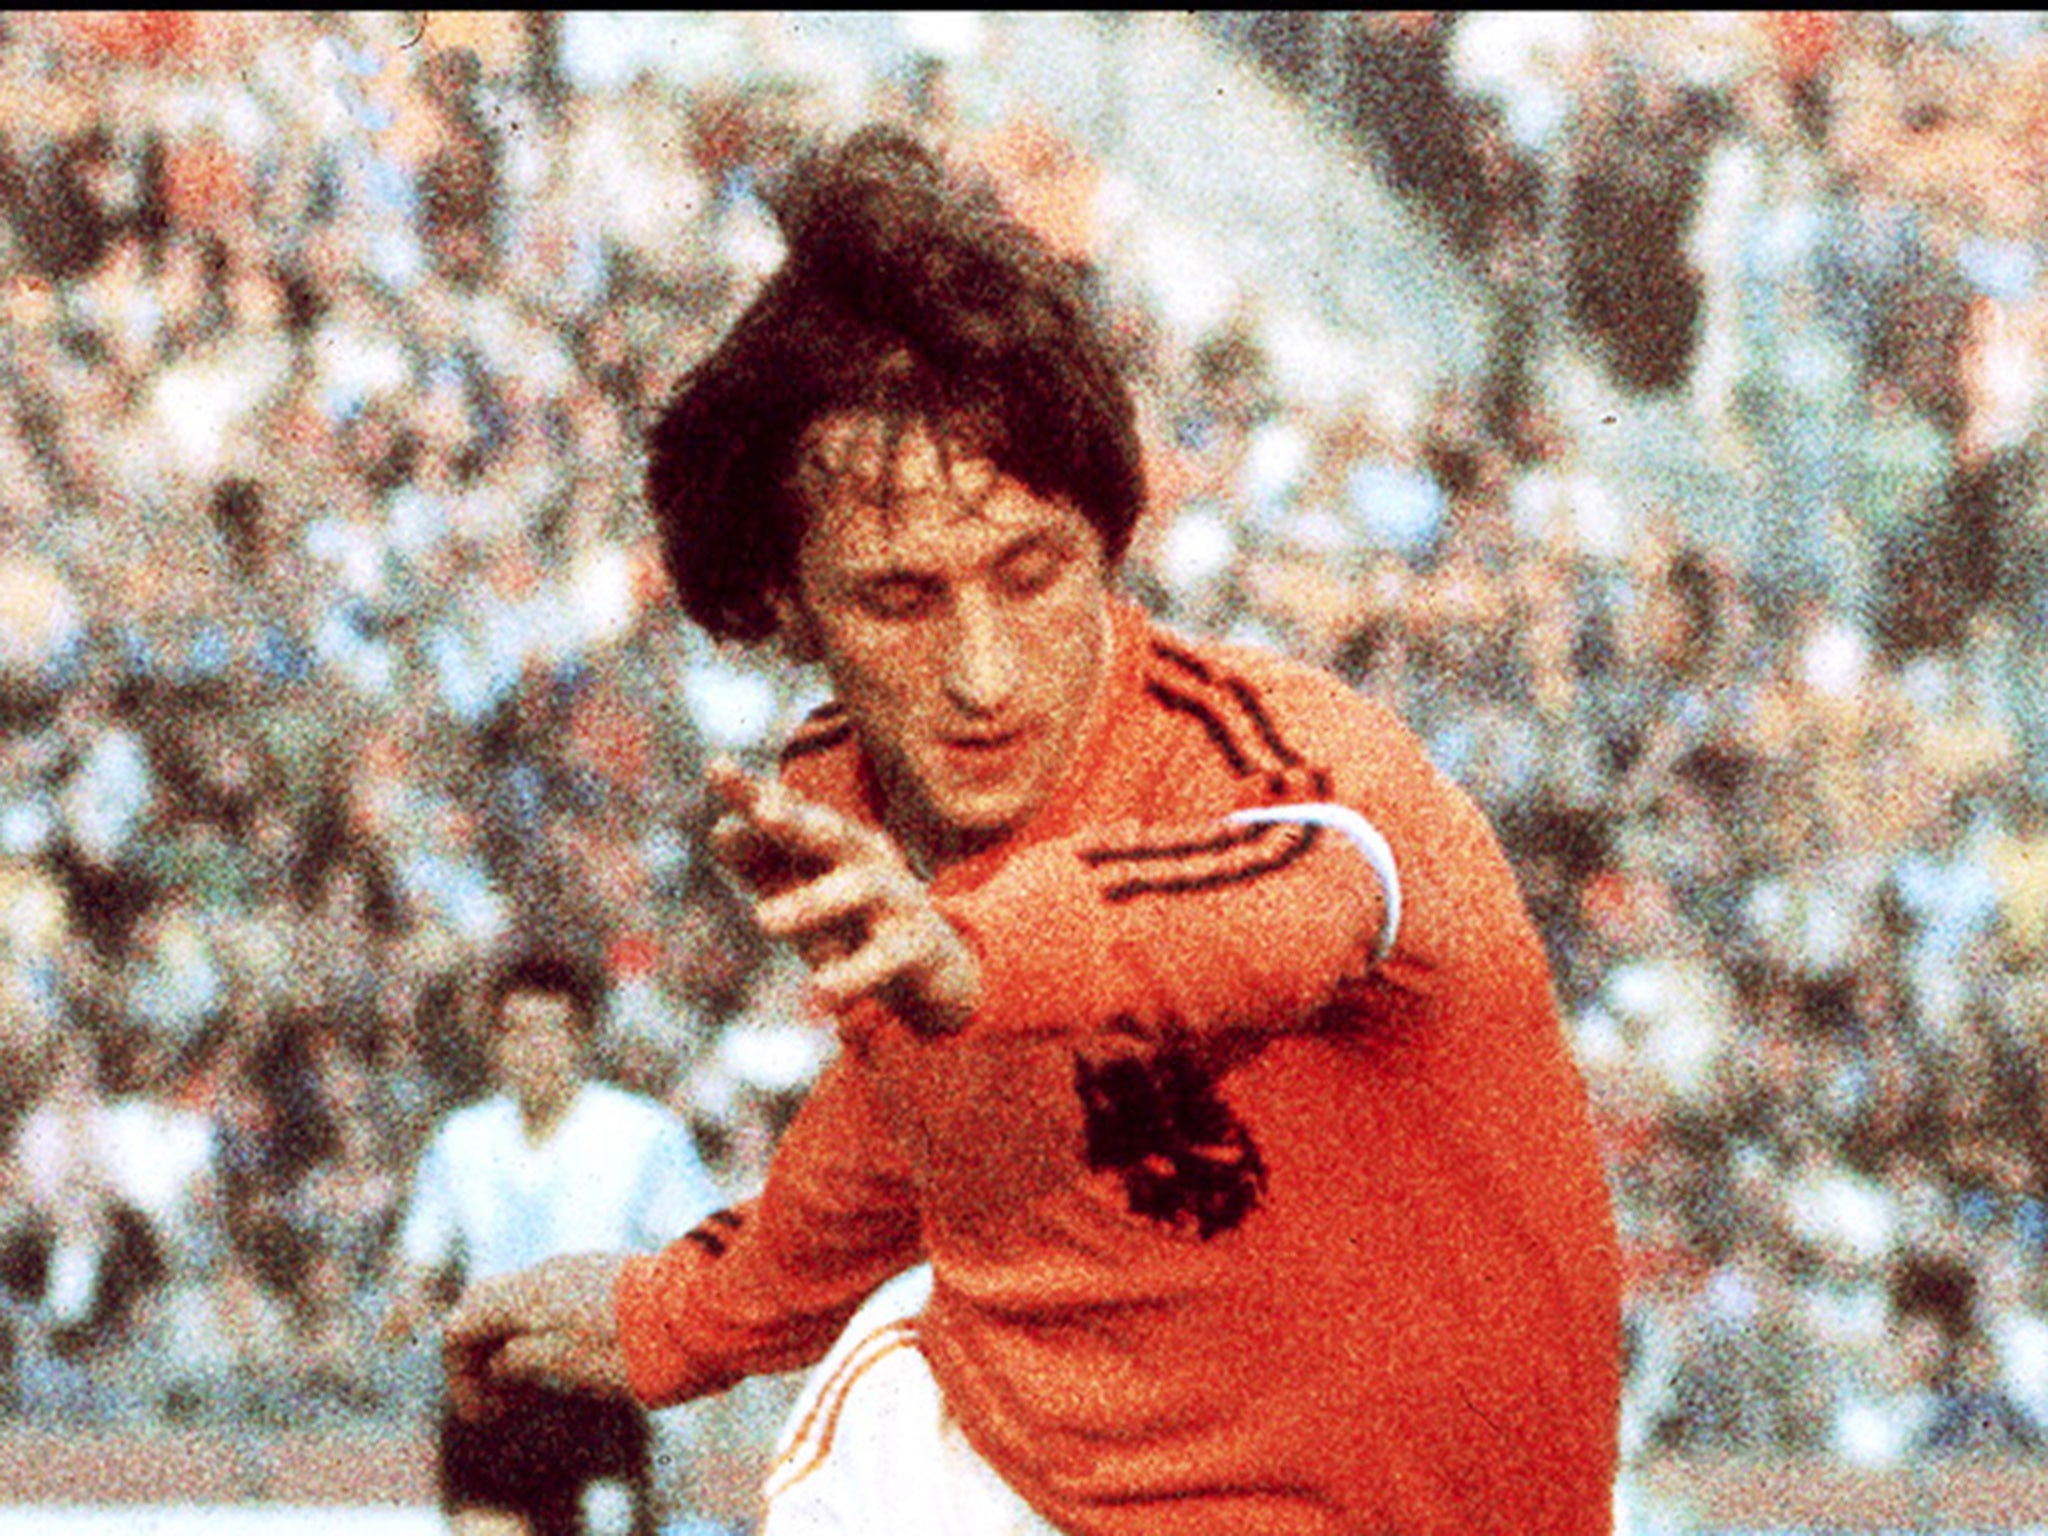 Caucho Cuestiones diplomáticas Vergonzoso Johan Cruyff dead: why Cruyff refused to wear the trademark three stripes  of Adidas at the 1974 World Cup | The Independent | The Independent